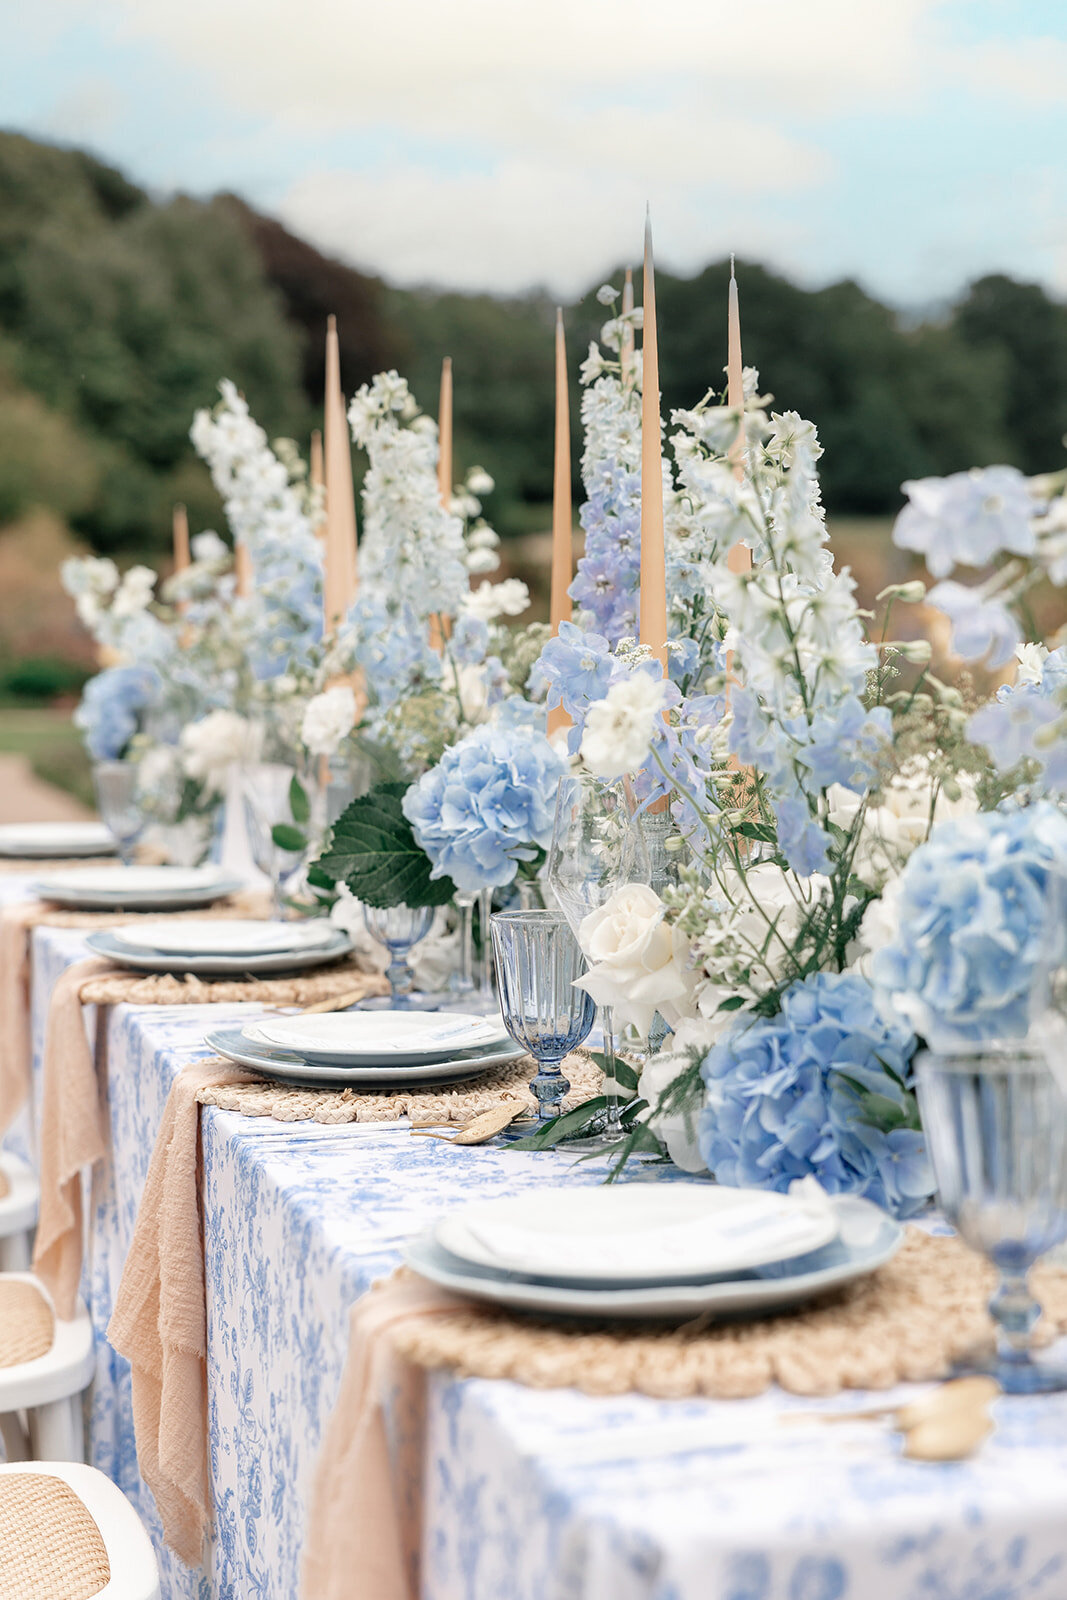 Wedding table styling and design